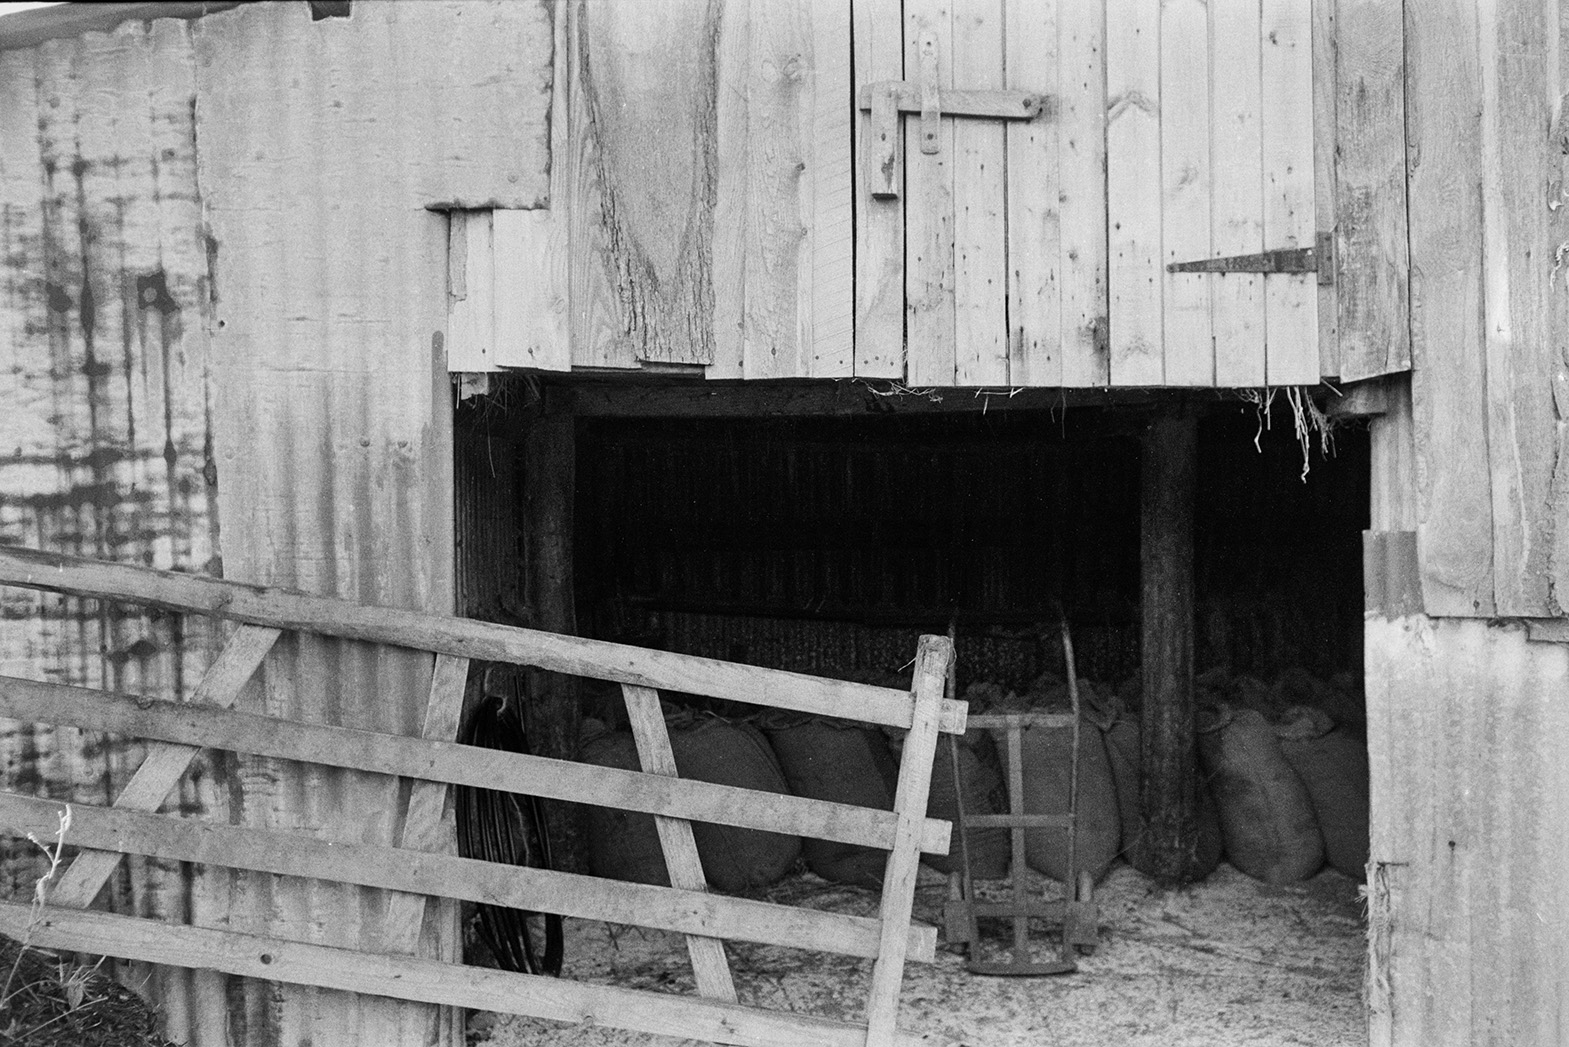 A wooden gate by the entrance to a corrugated iron barn at Mill Road Farm, Beaford. Sacks, possibly filled with grain, and a sack truck can be seen inside the barn. The farm was also known as Jeffrys.